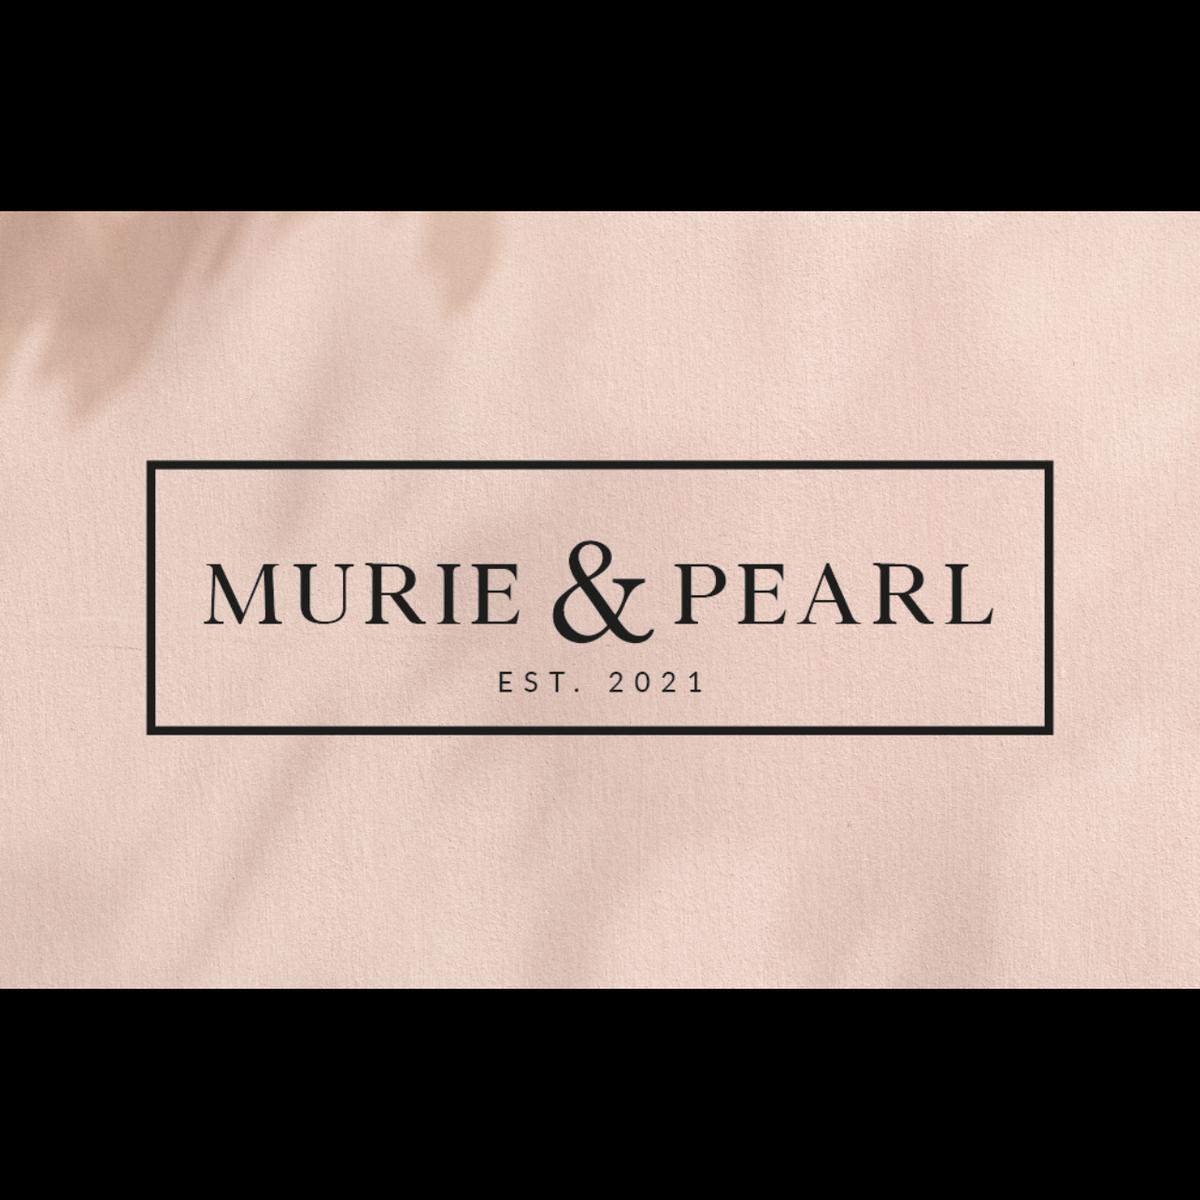 Murie&Pearl's images